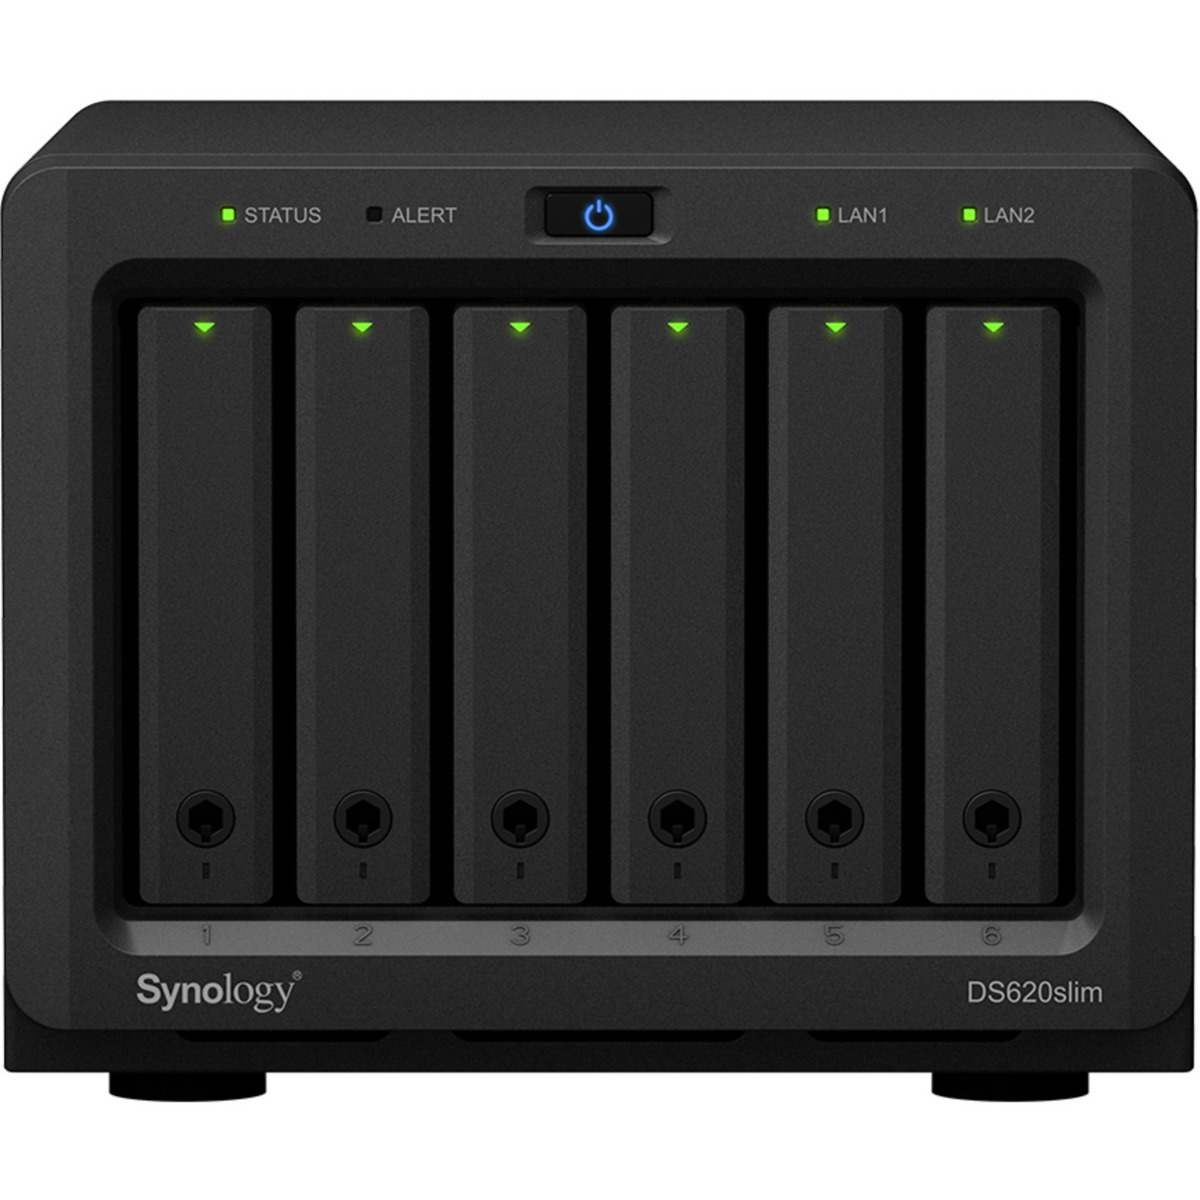 buy $2190 Synology DiskStation DS620slim 12tb Desktop NAS - Network Attached Storage Device 6x2000gb Western Digital Red SA500 WDS200T1R0A 2.5 SATA 6Gb/s SSD NAS Class Drives Installed - Burn-In Tested - FREE RAM UPGRADE - nas headquarters buy network attached storage server device das new raid-5 free shipping usa DiskStation DS620slim